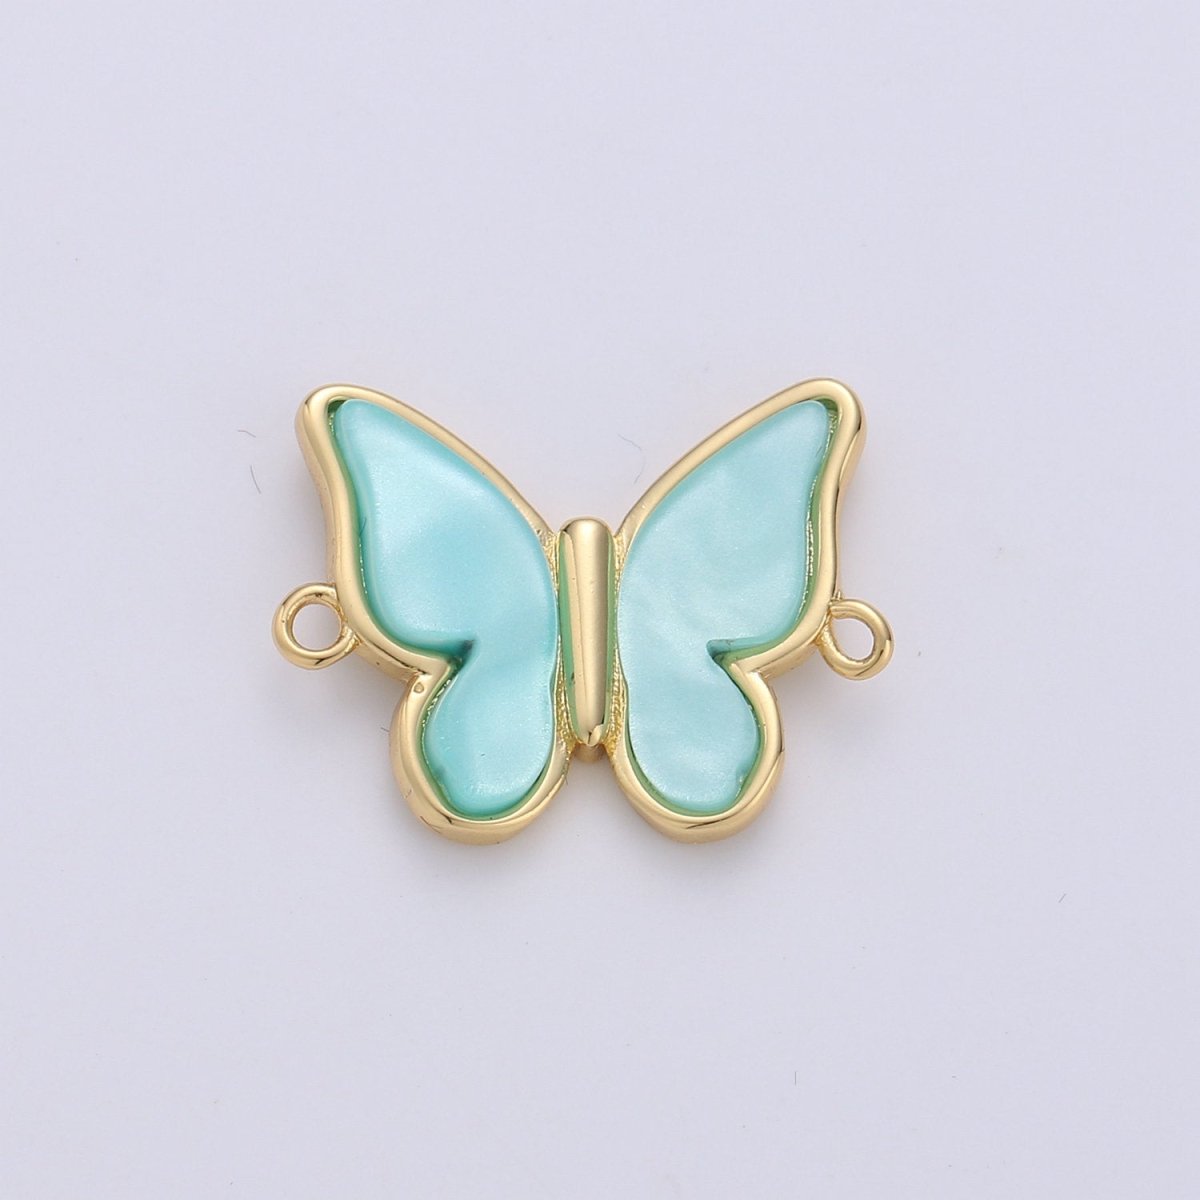 Mariposa Charm Butterfly Charms, Mother Of Pearl Butterfly Teal, Pink Butterfly Bracelet Necklace Connector Polished Gold Plated over Brass F-384 - F-386 - DLUXCA